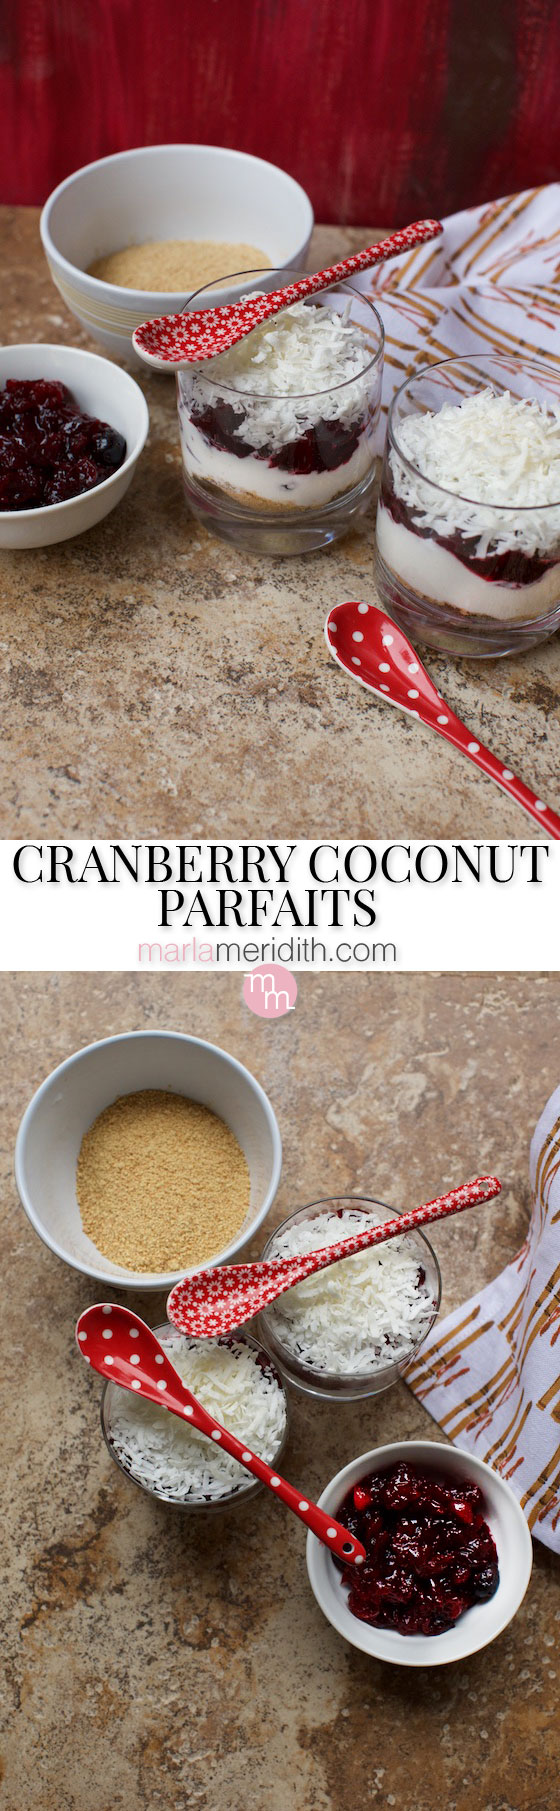 Cranberries & Cream Coconut Parfaits recipe. A great way to use up leftover cranberry sauce! marlameridith.com #cranberries #parfait #dessert #thanksgiving